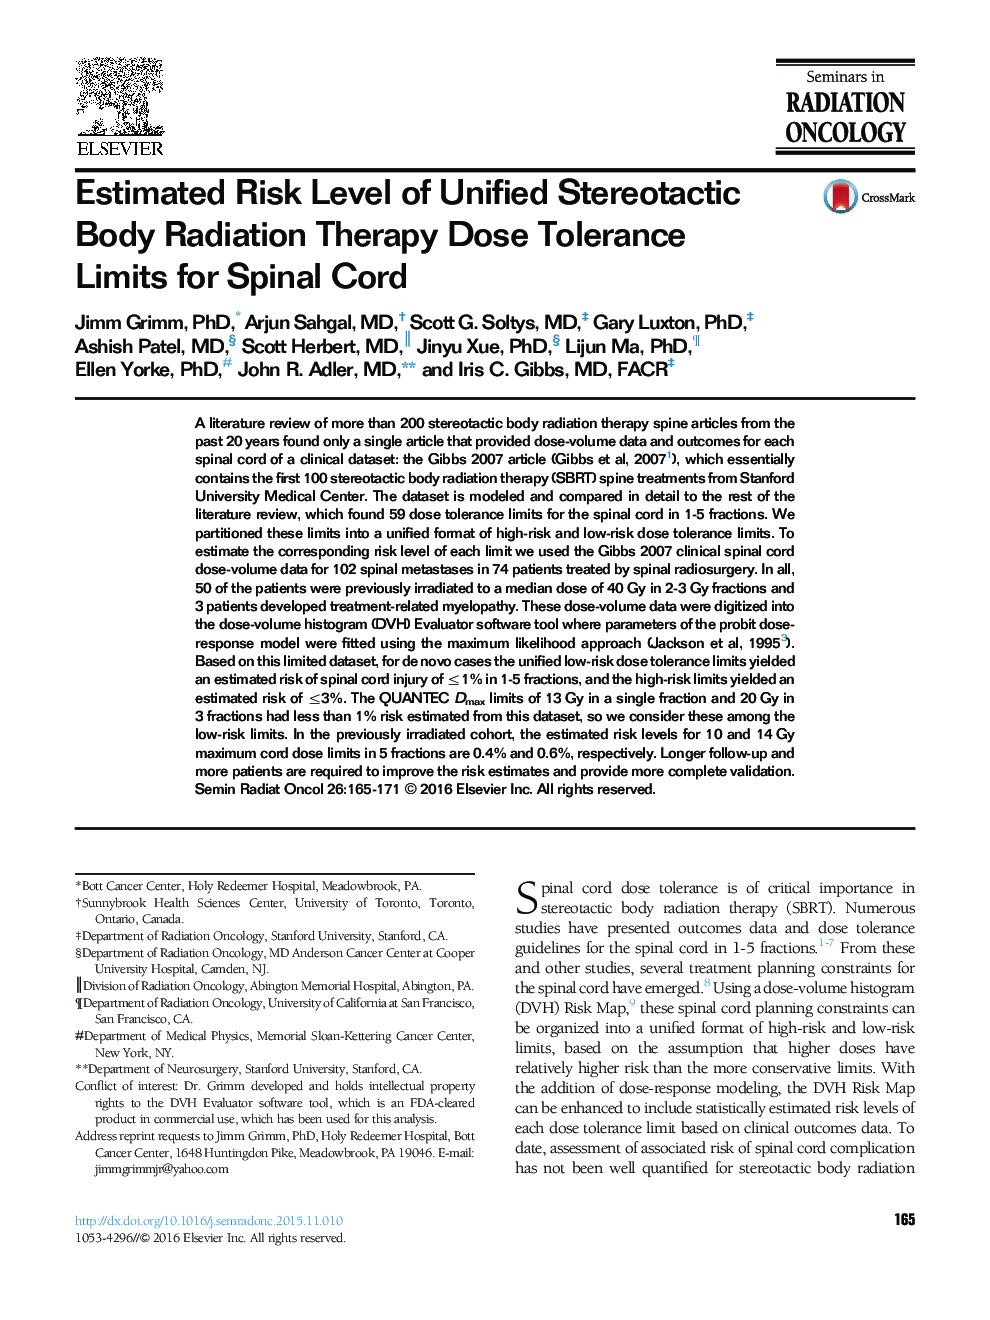 Estimated Risk Level of Unified Stereotactic Body Radiation Therapy Dose Tolerance Limits for Spinal Cord 